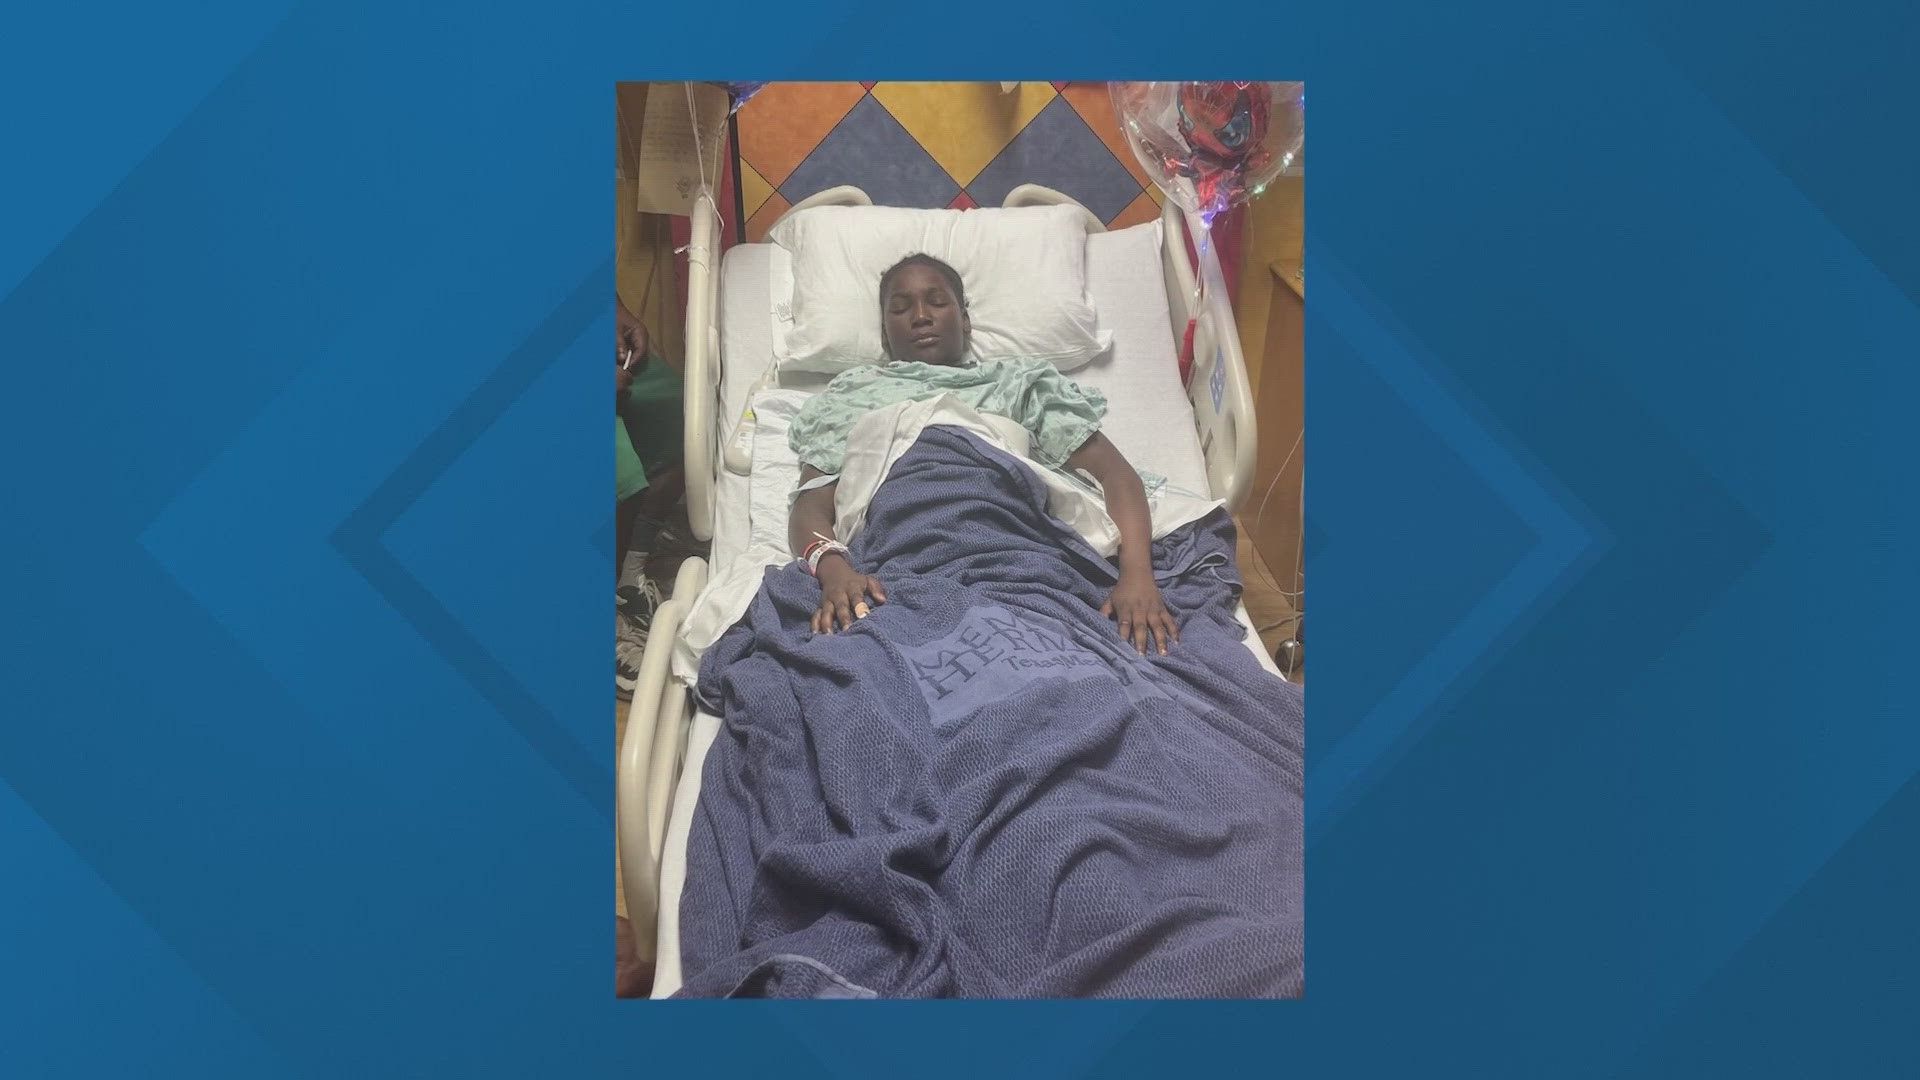 It's been two weeks since Calvin "CJ" Jackson Jr. was shot while playing at a playground at a northeast Houston apartment. He remains in the hospital.